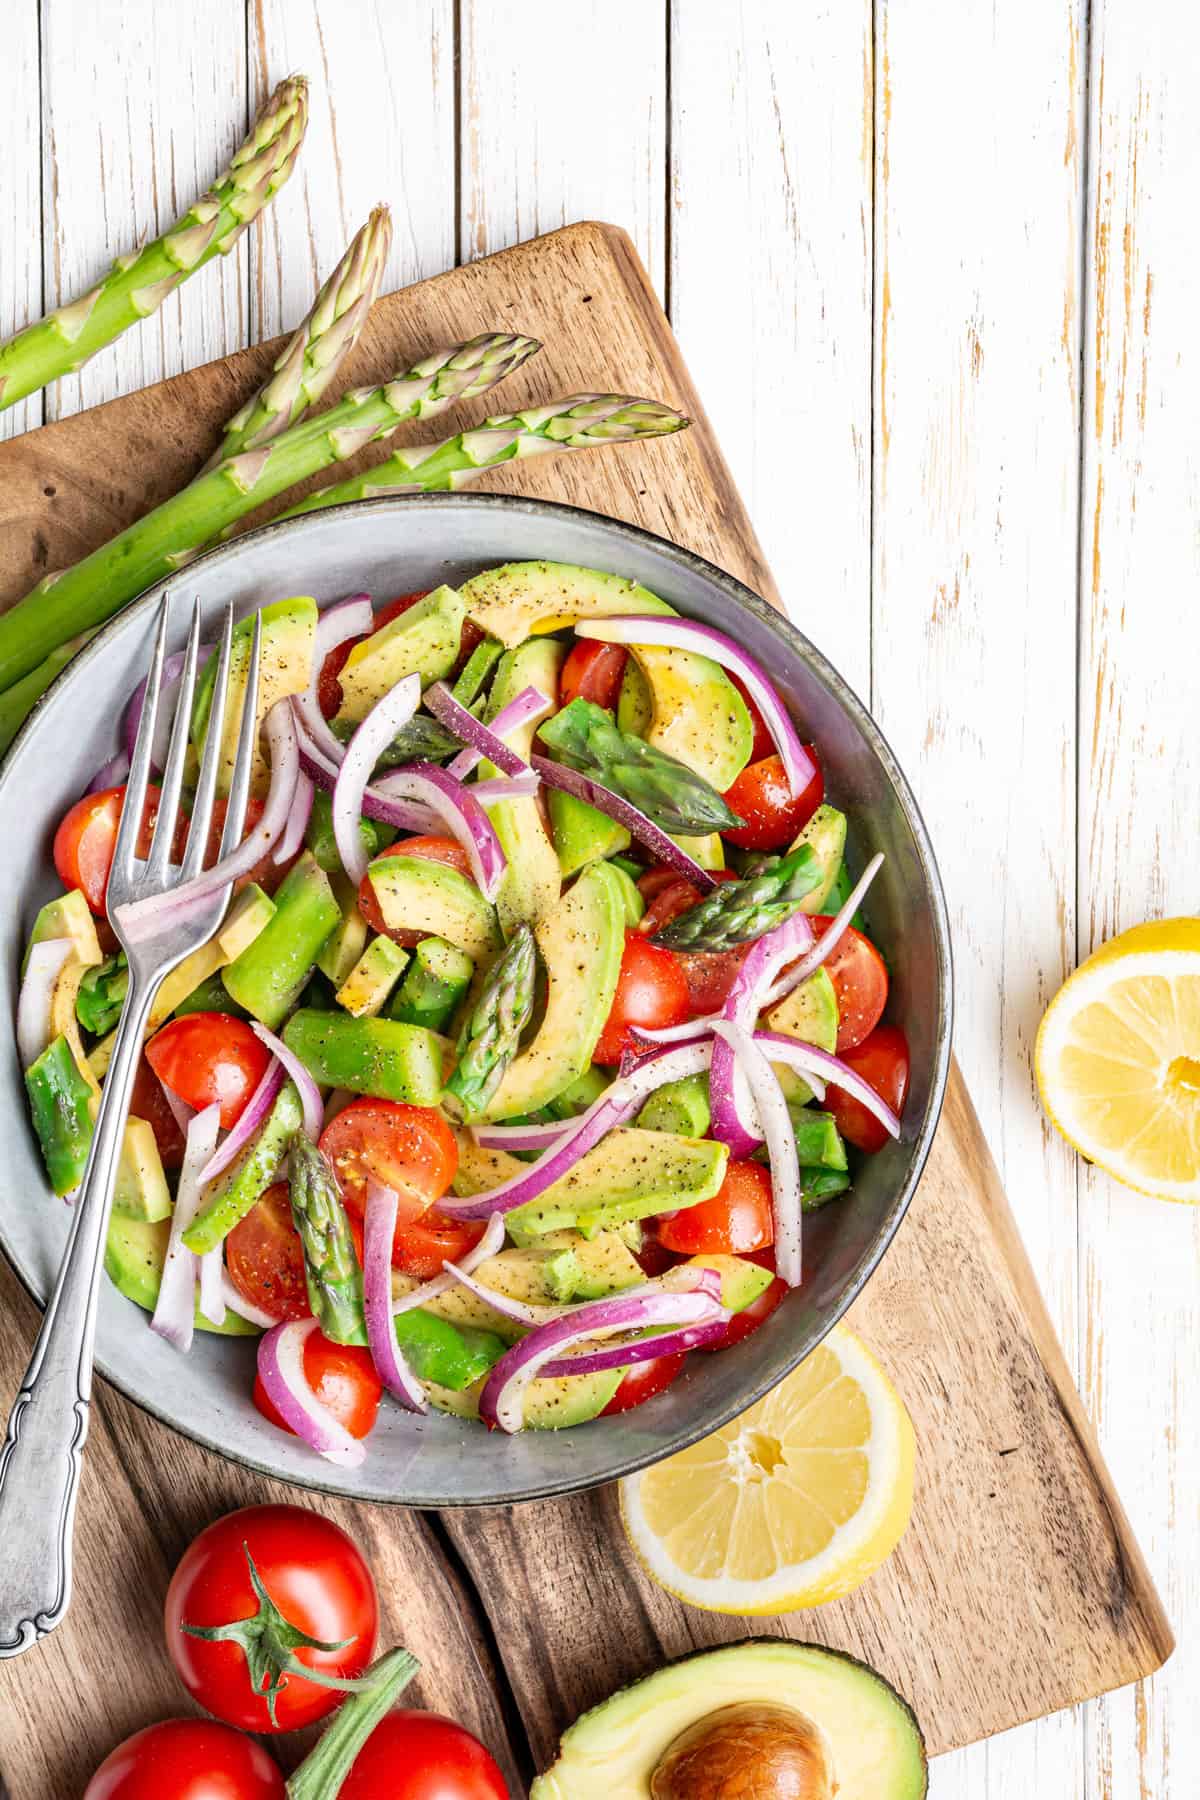 Asparagus, avocado, tomato, and red onion salad in a bowl on a wooden board.